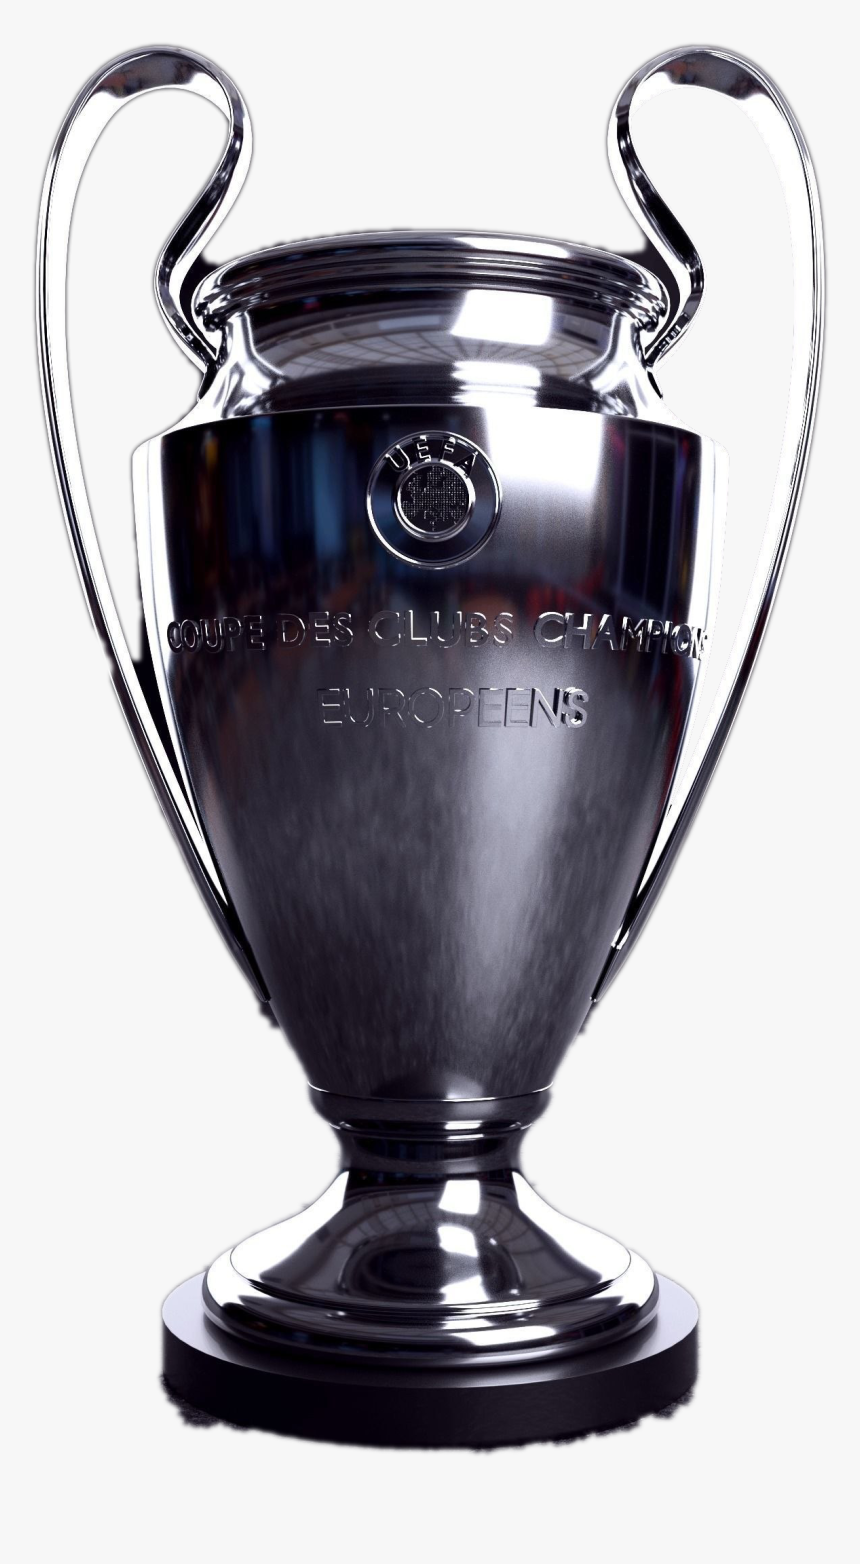 Uefa Champions League Trophy Png Background Image HD Wallpaper